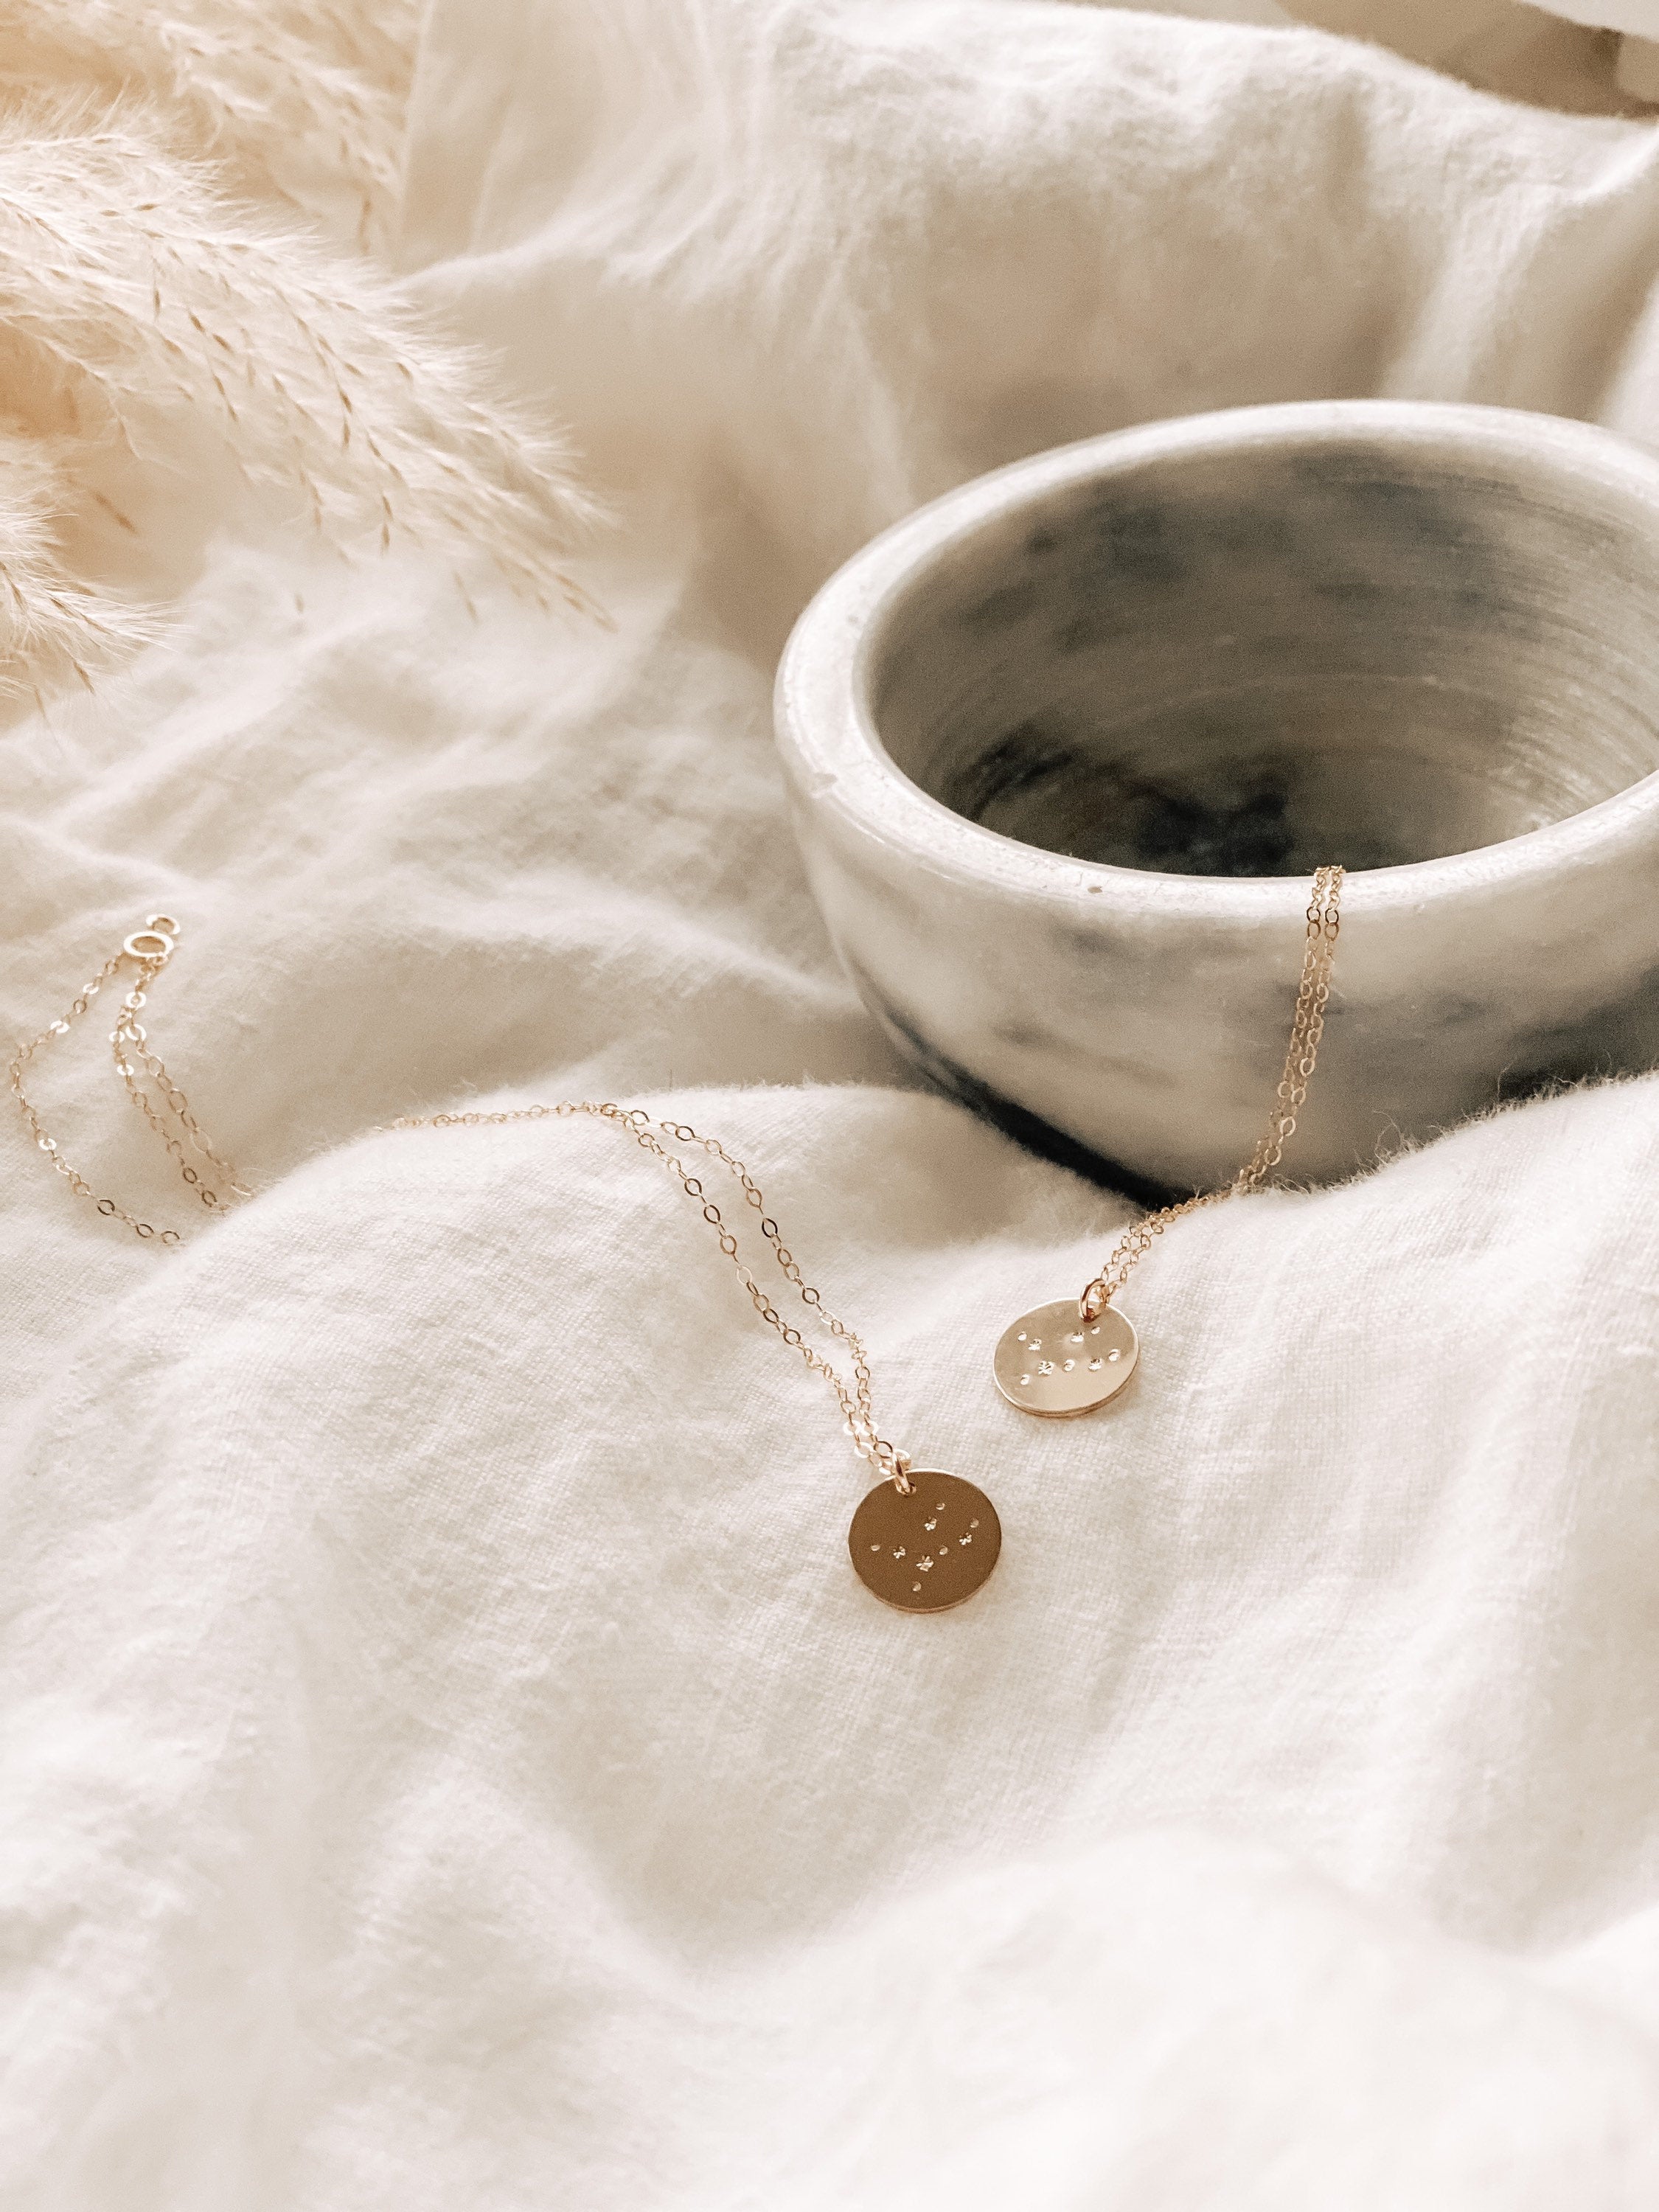 Constellation necklace circle pendant - custom - highest  quality 14/20 gold fill - tarnish resitant - hand stamped - star sign - astrology